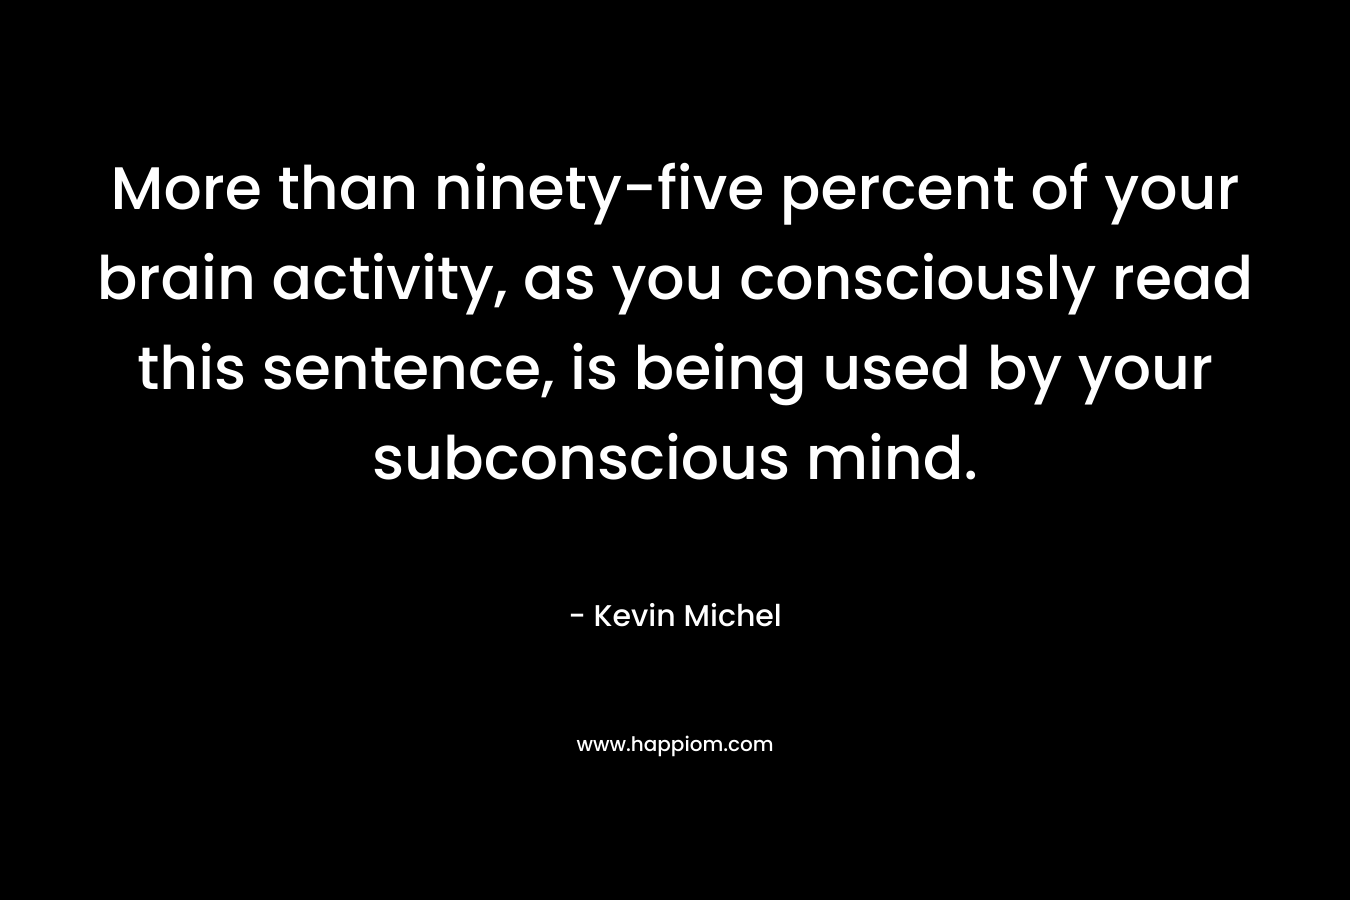 More than ninety-five percent of your brain activity, as you consciously read this sentence, is being used by your subconscious mind.